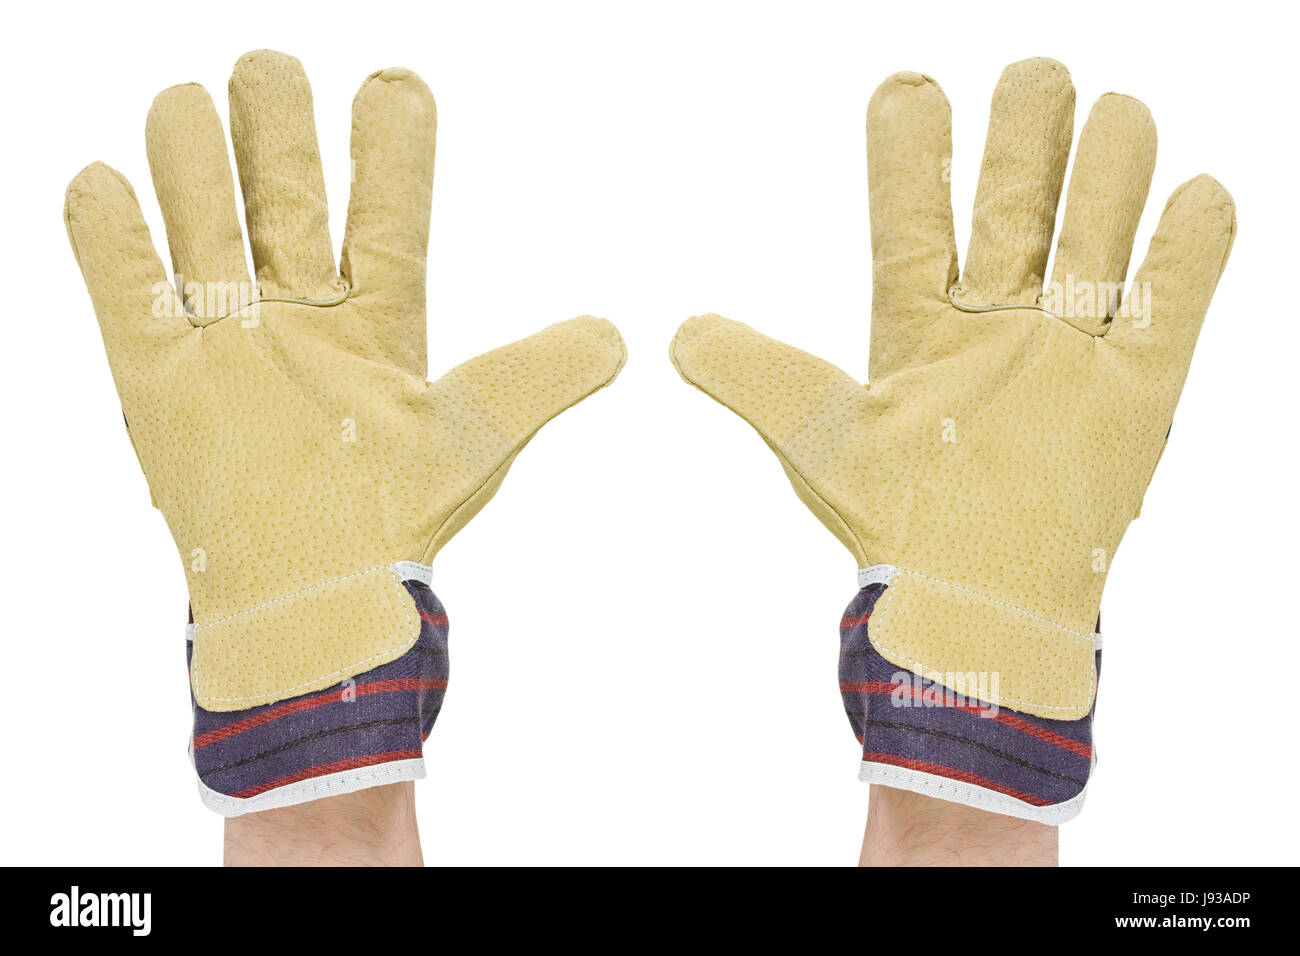 job, glove, work, factory, protect, protection, professional, labor, security, Stock Photo